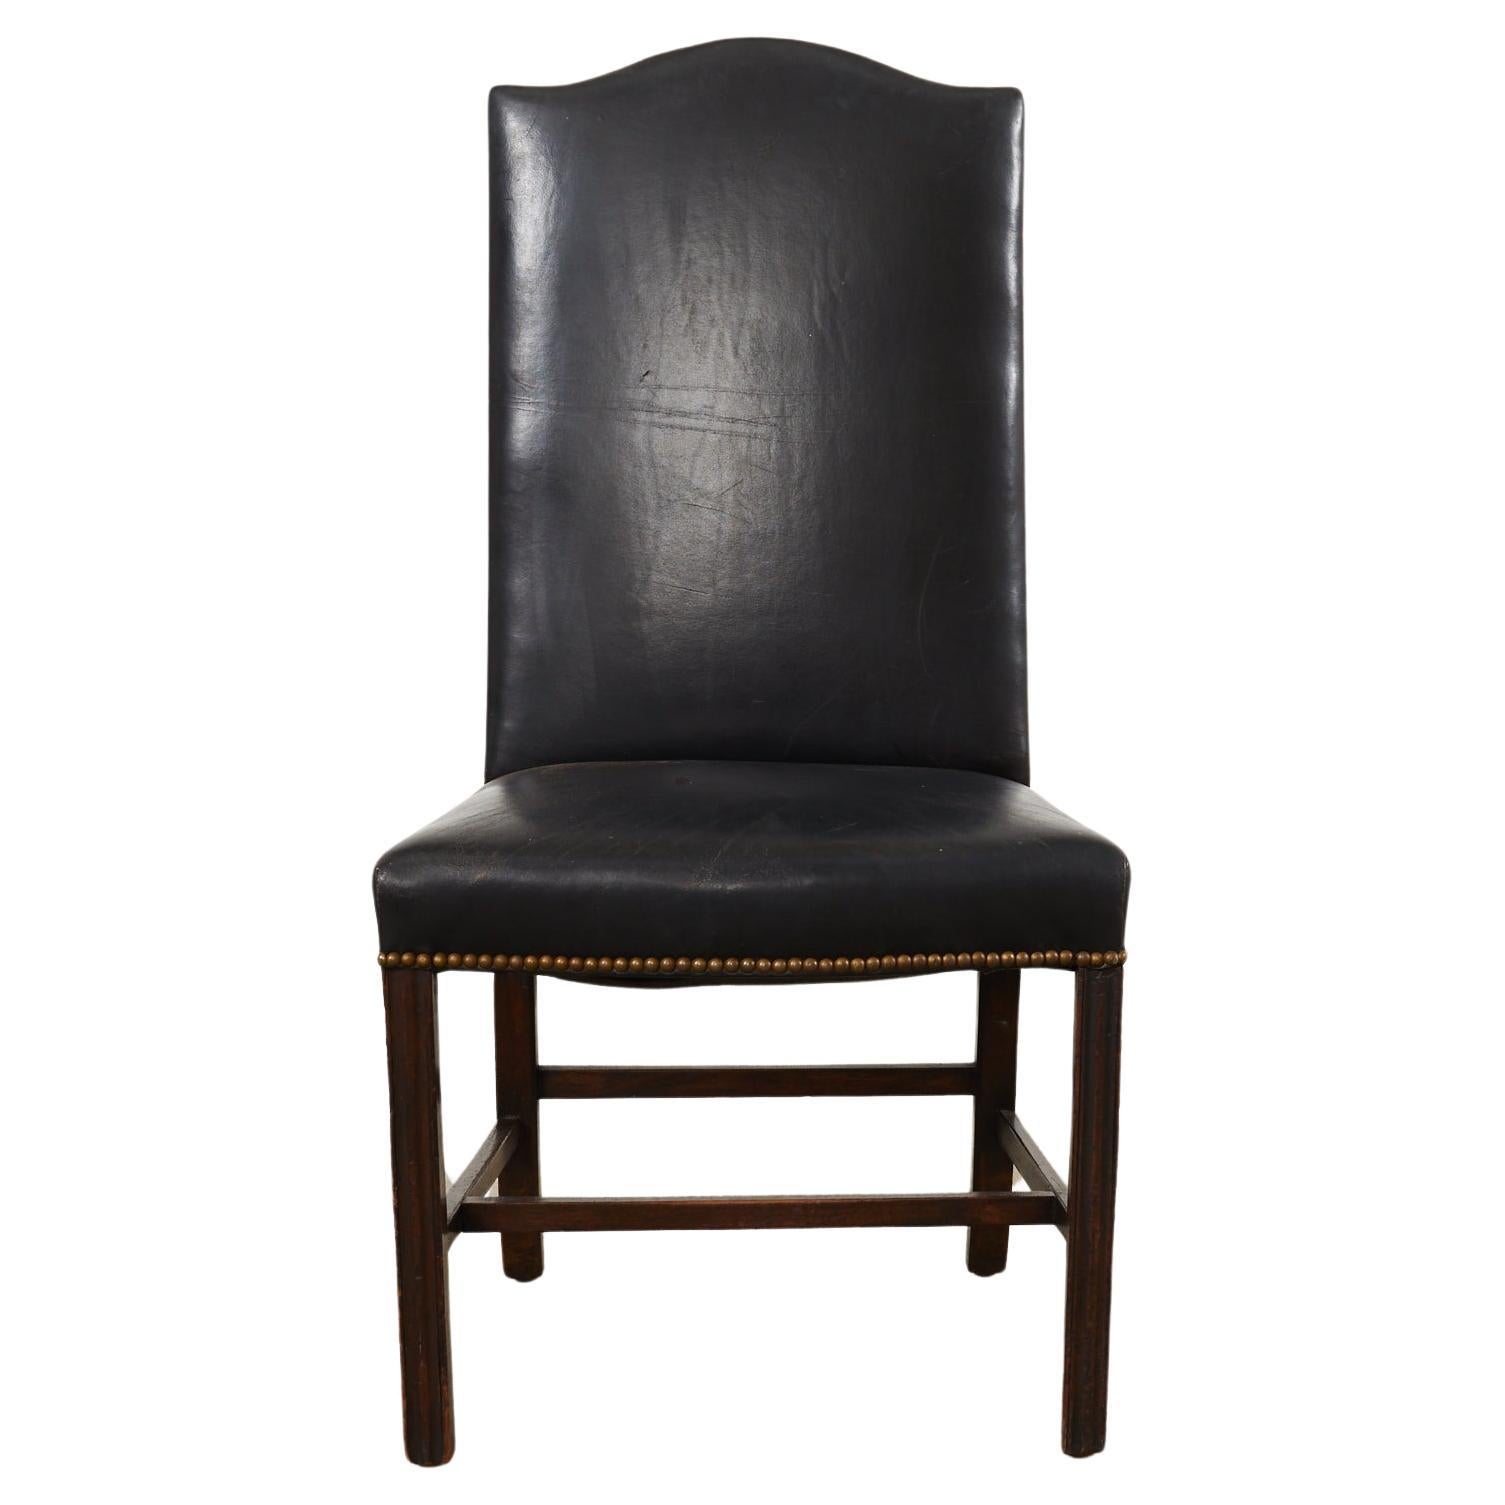 19th Century Georgian Style Mahogany Leather Hall Chair For Sale